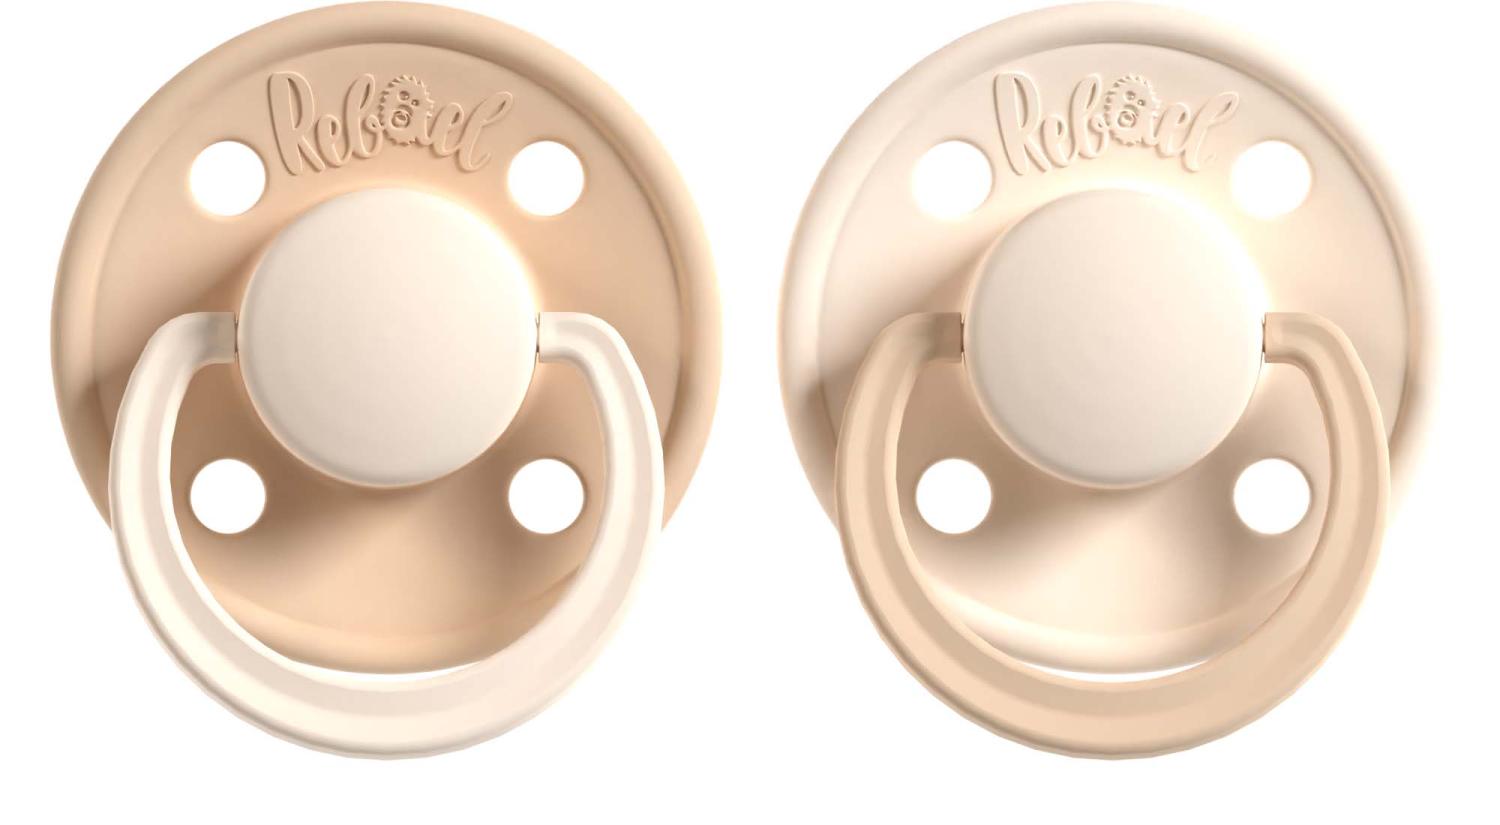 Rebael Pacifier Dusty Pearly Mouse - Frosty Pearly Lion 0-6 months